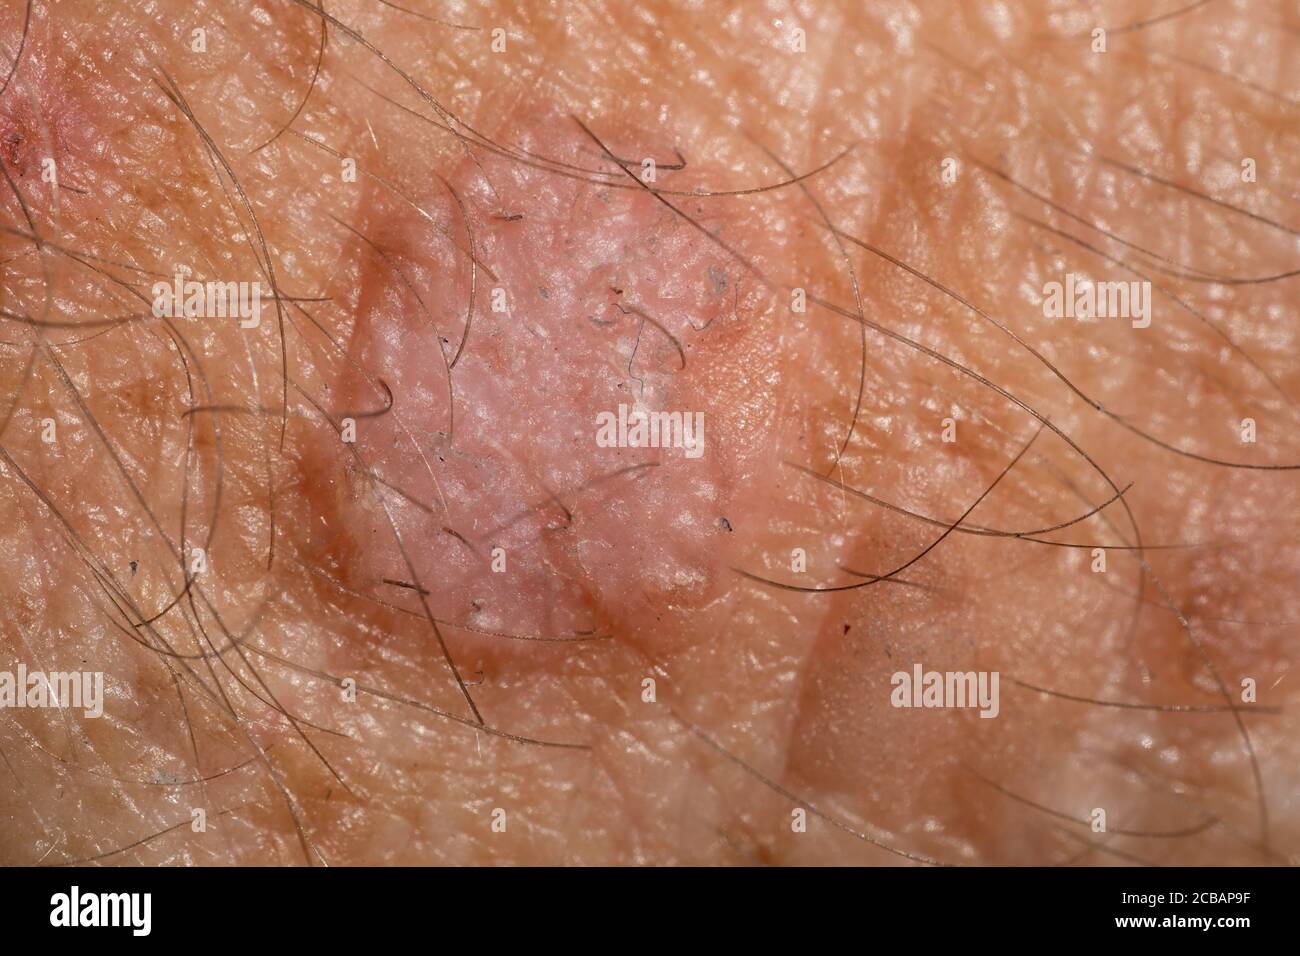 Close up of a lesion of actinic keratosis or sunspots on sun-damaged skin of the hand of a man. This can be treated with cryosurgery or ointments Stock Photo